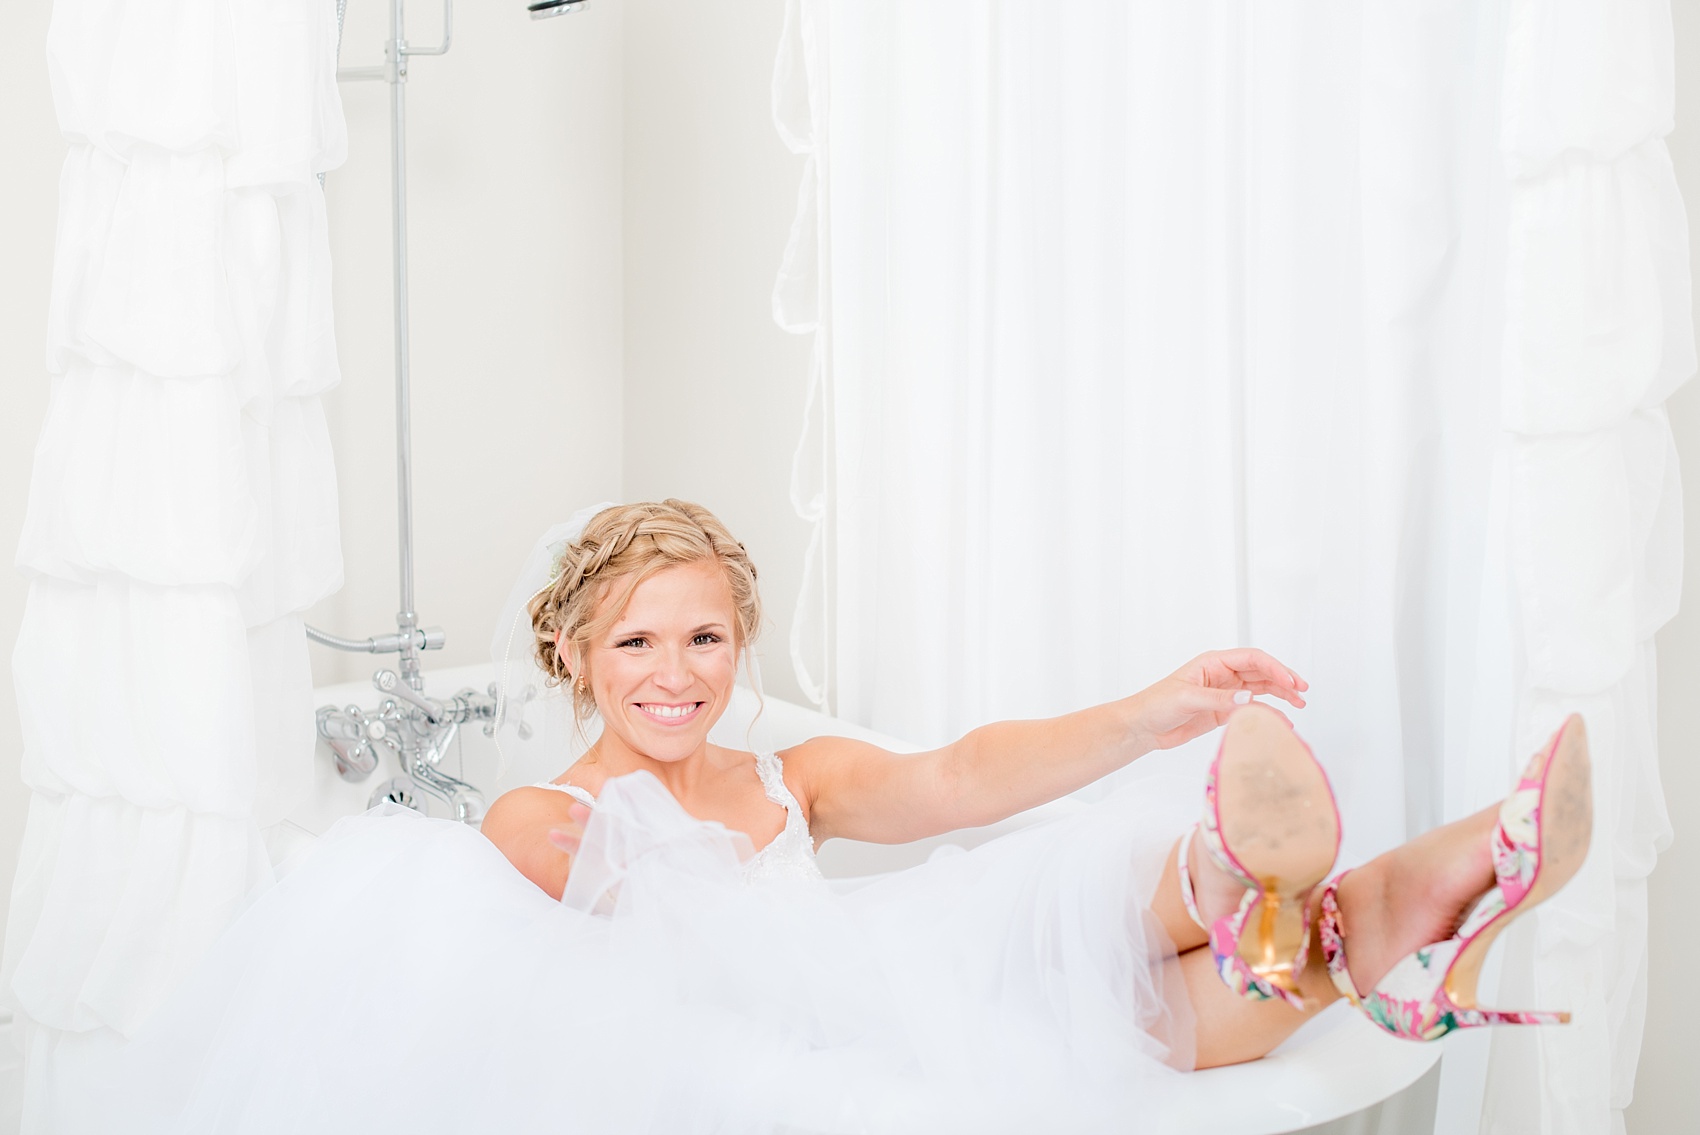 Mikkel Paige Photography wedding photos at The Merrimon-Wynne House in downtown Raleigh. A bridal portrait with the bride's tulle skirt in the claw foot tub of the North Carolina venue.